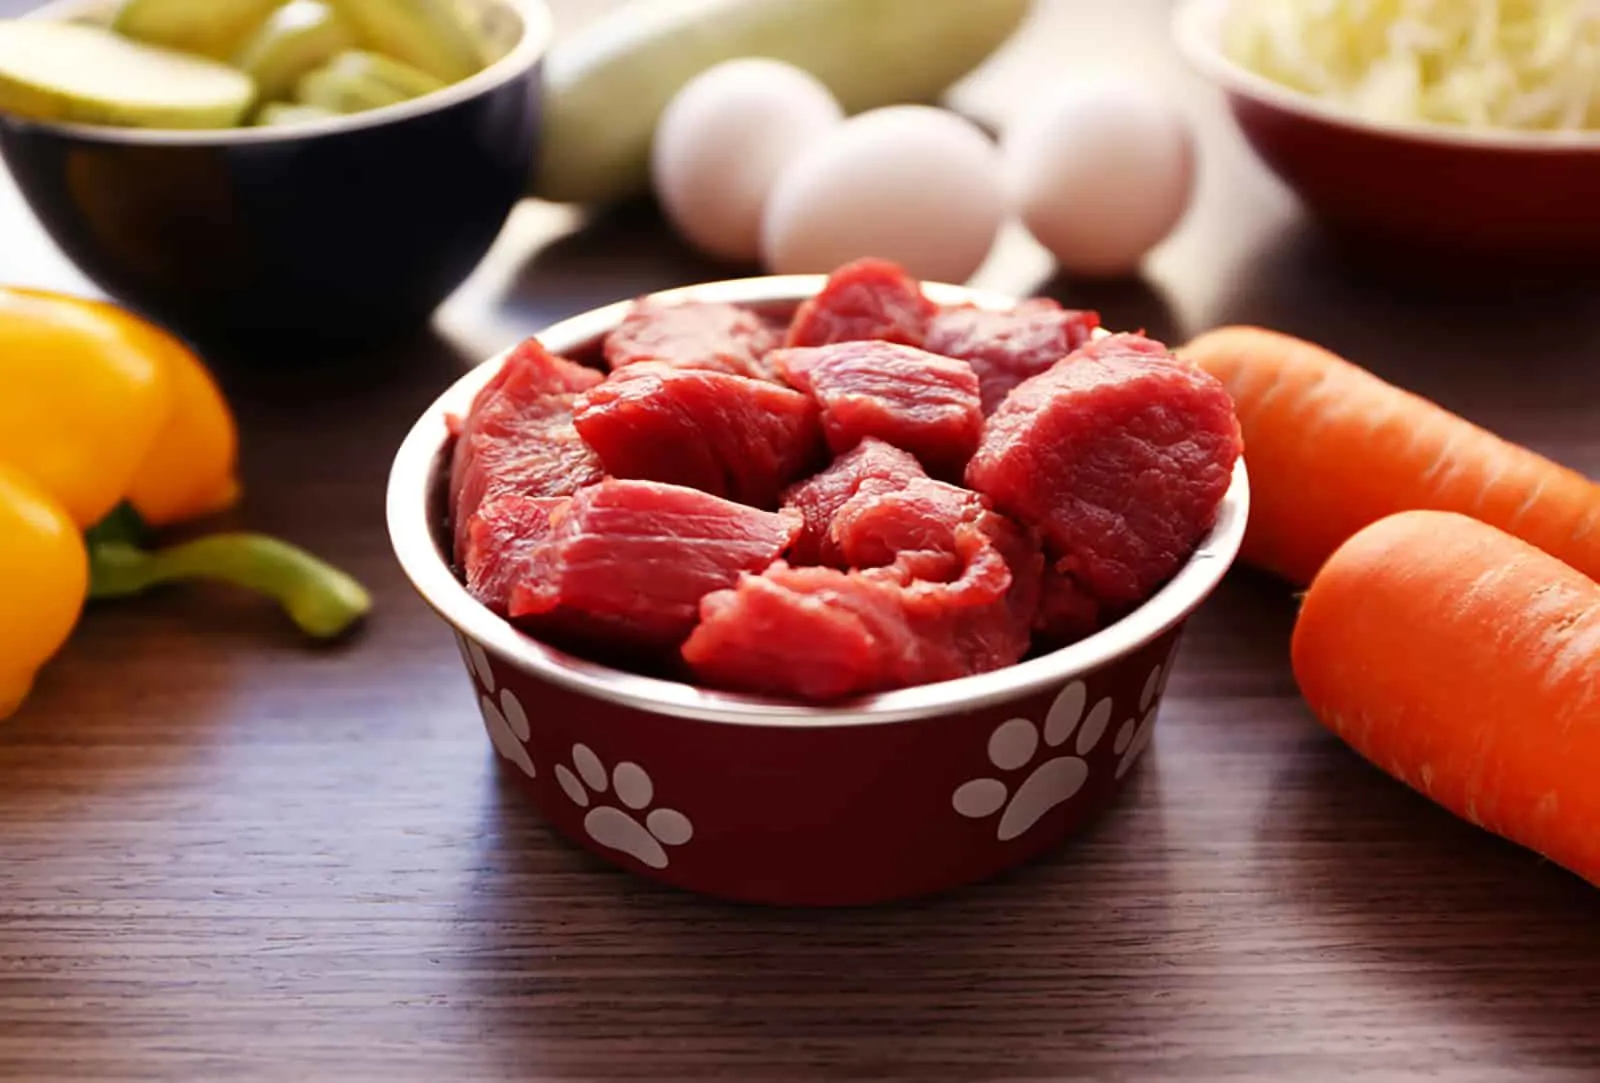 raw meat in a dog bowl on table with healthy food